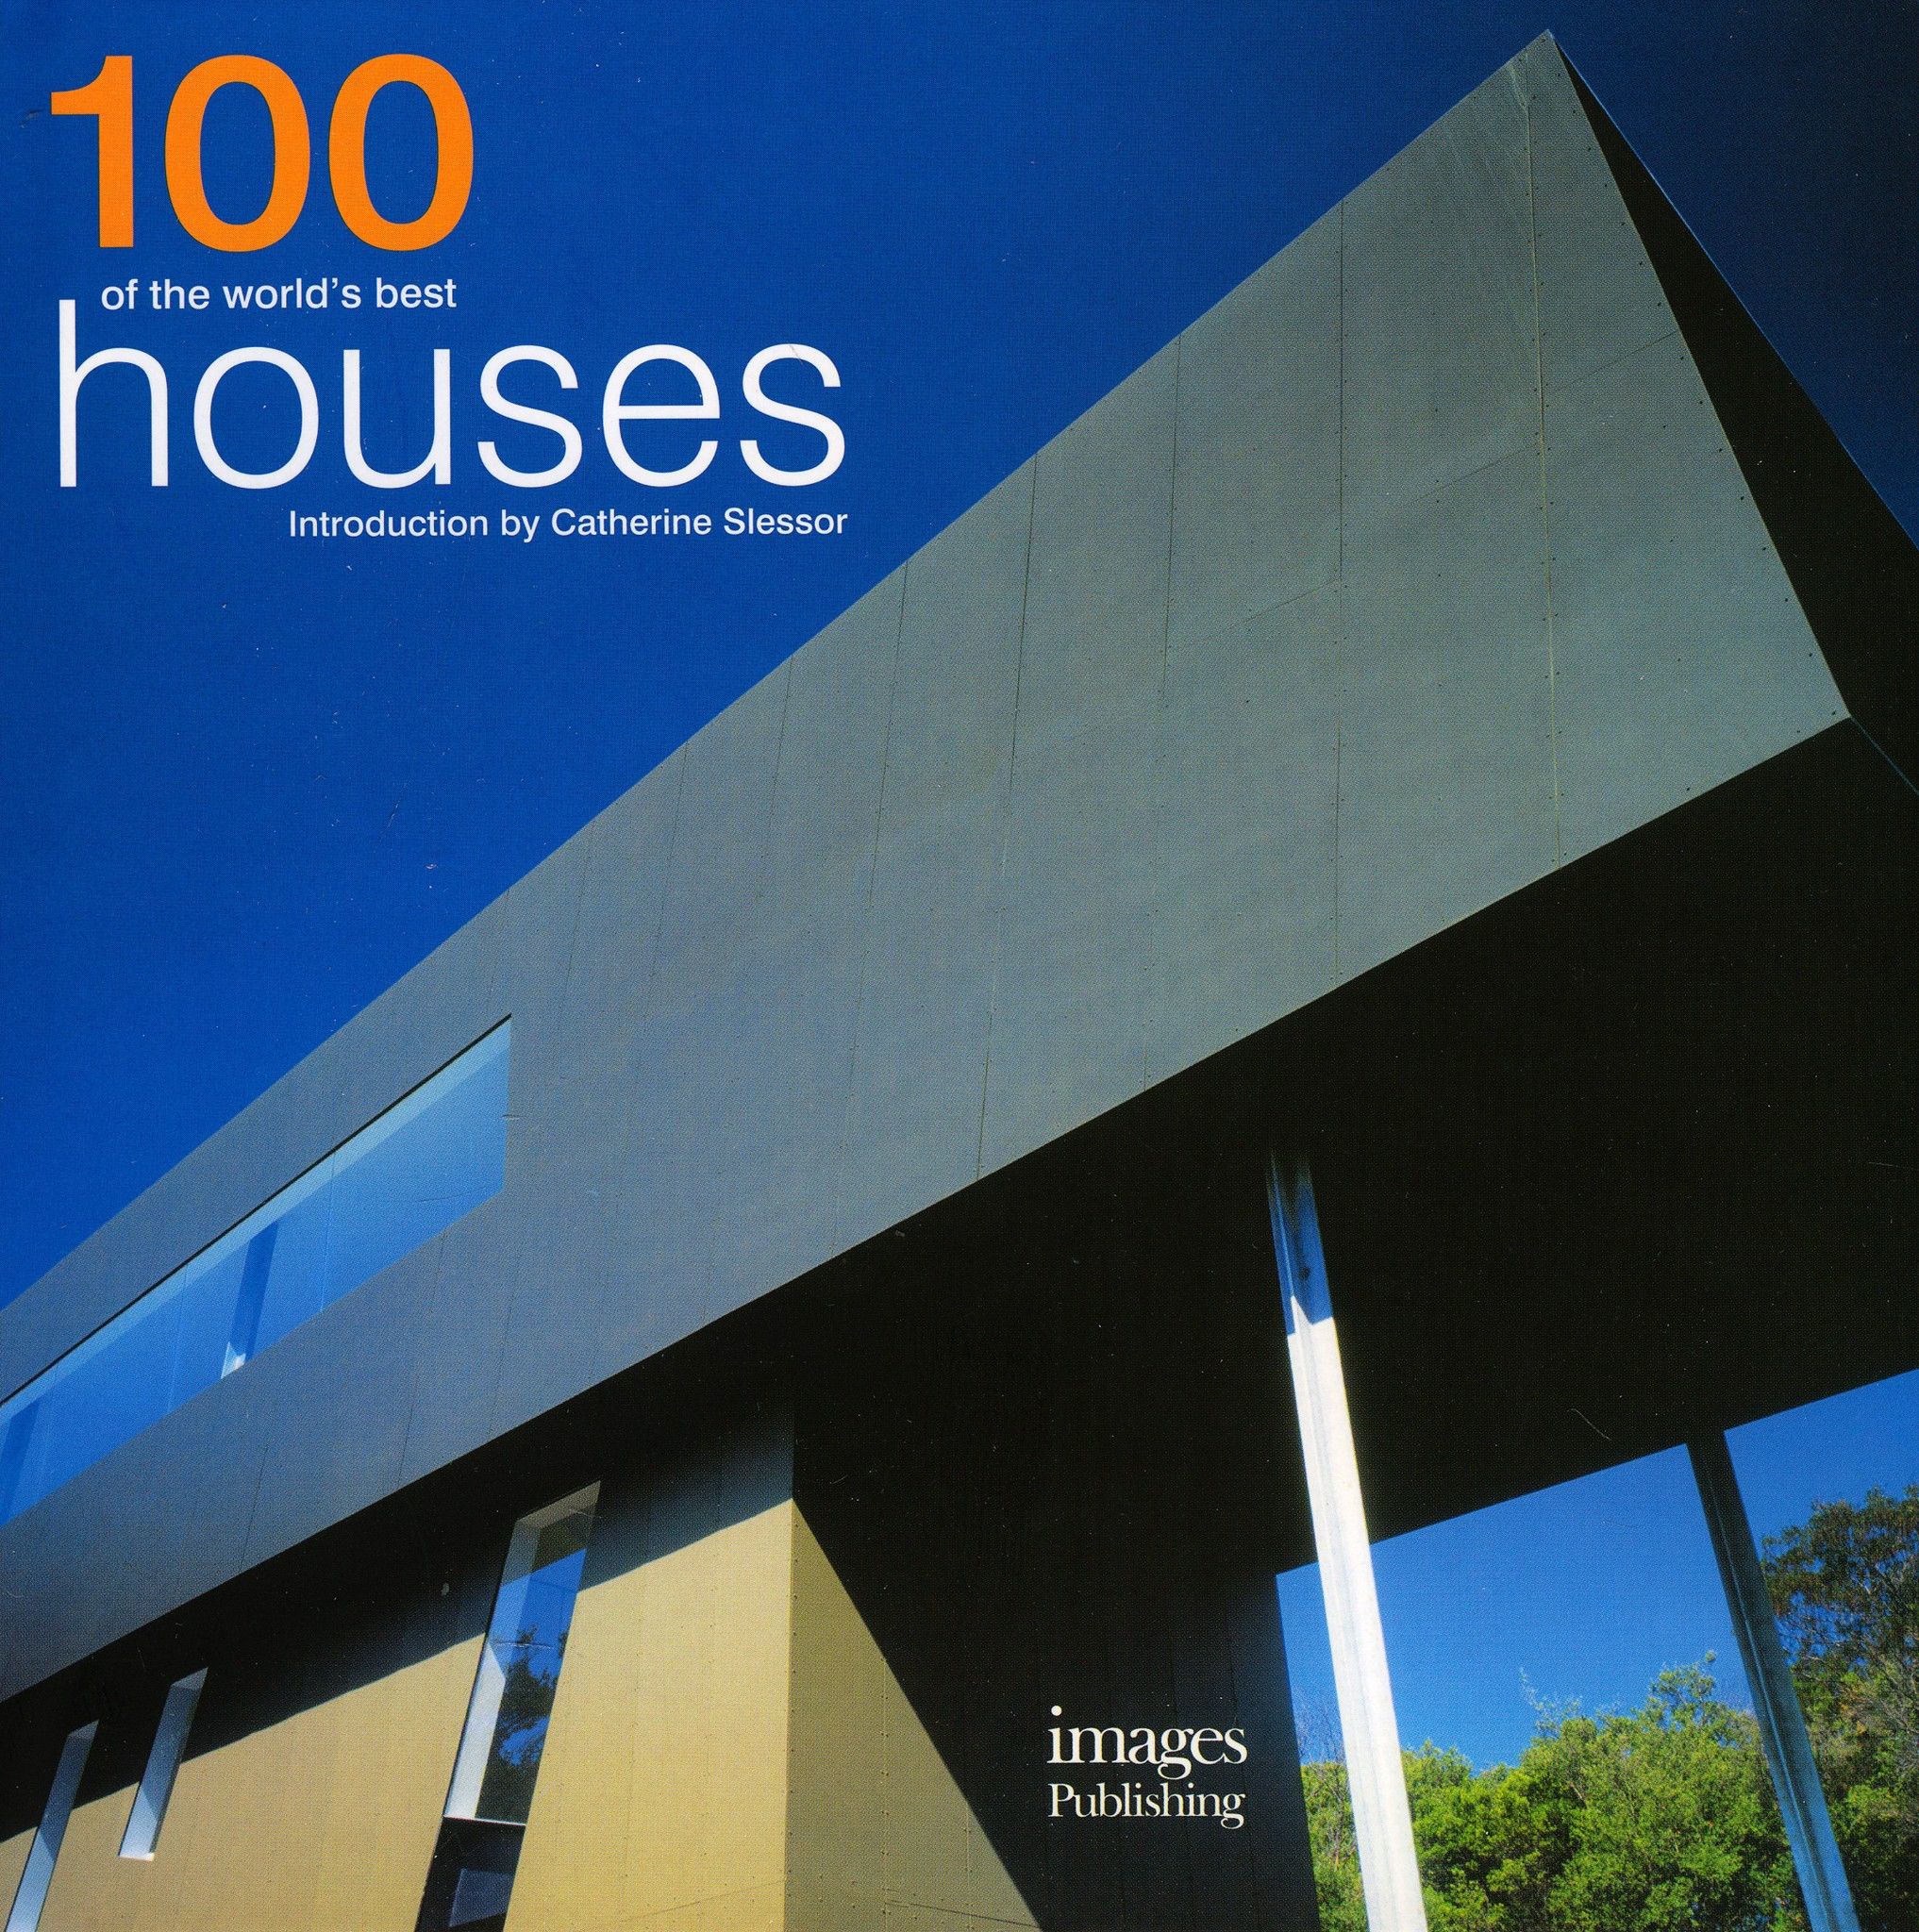  100 of the World's Best Houses_Catherine Slessor_9781864704358_Images Publishing Group Pty Ltd 